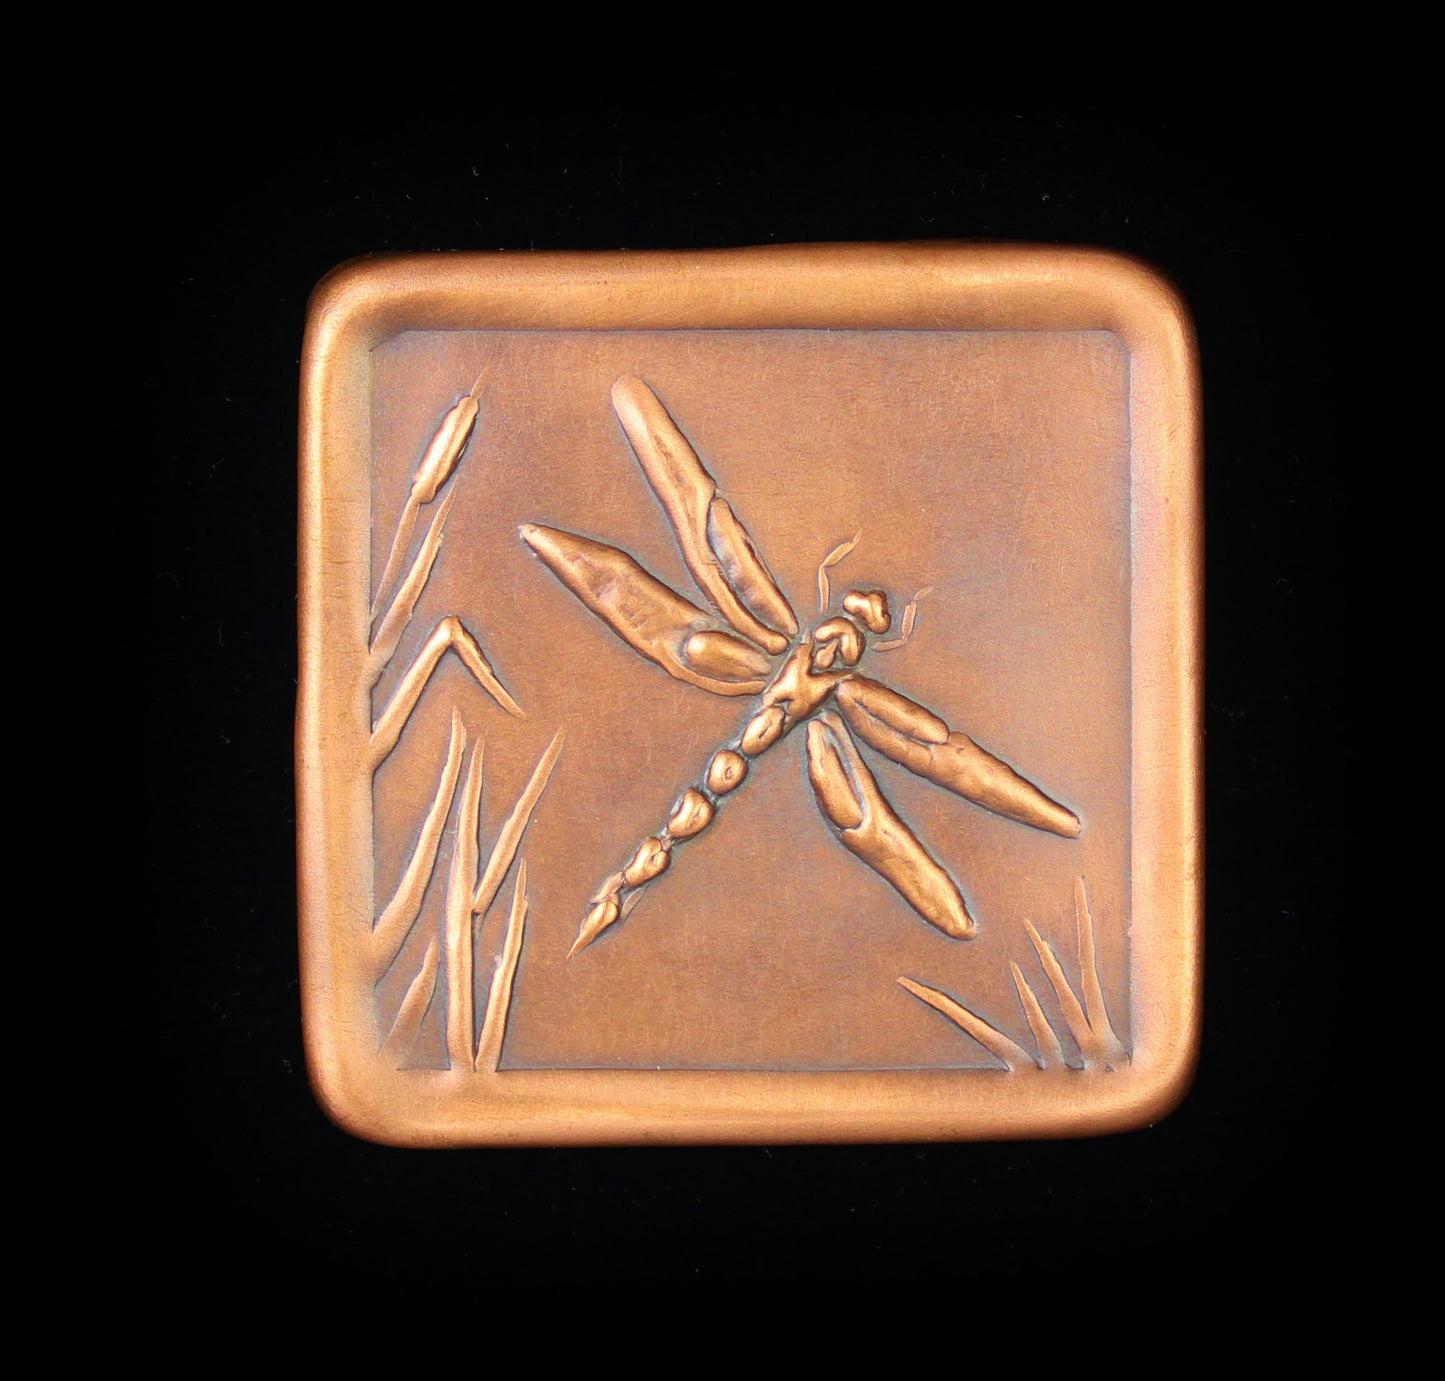 Dragonfly Copper Tile, 3" x 3" x 1/4"